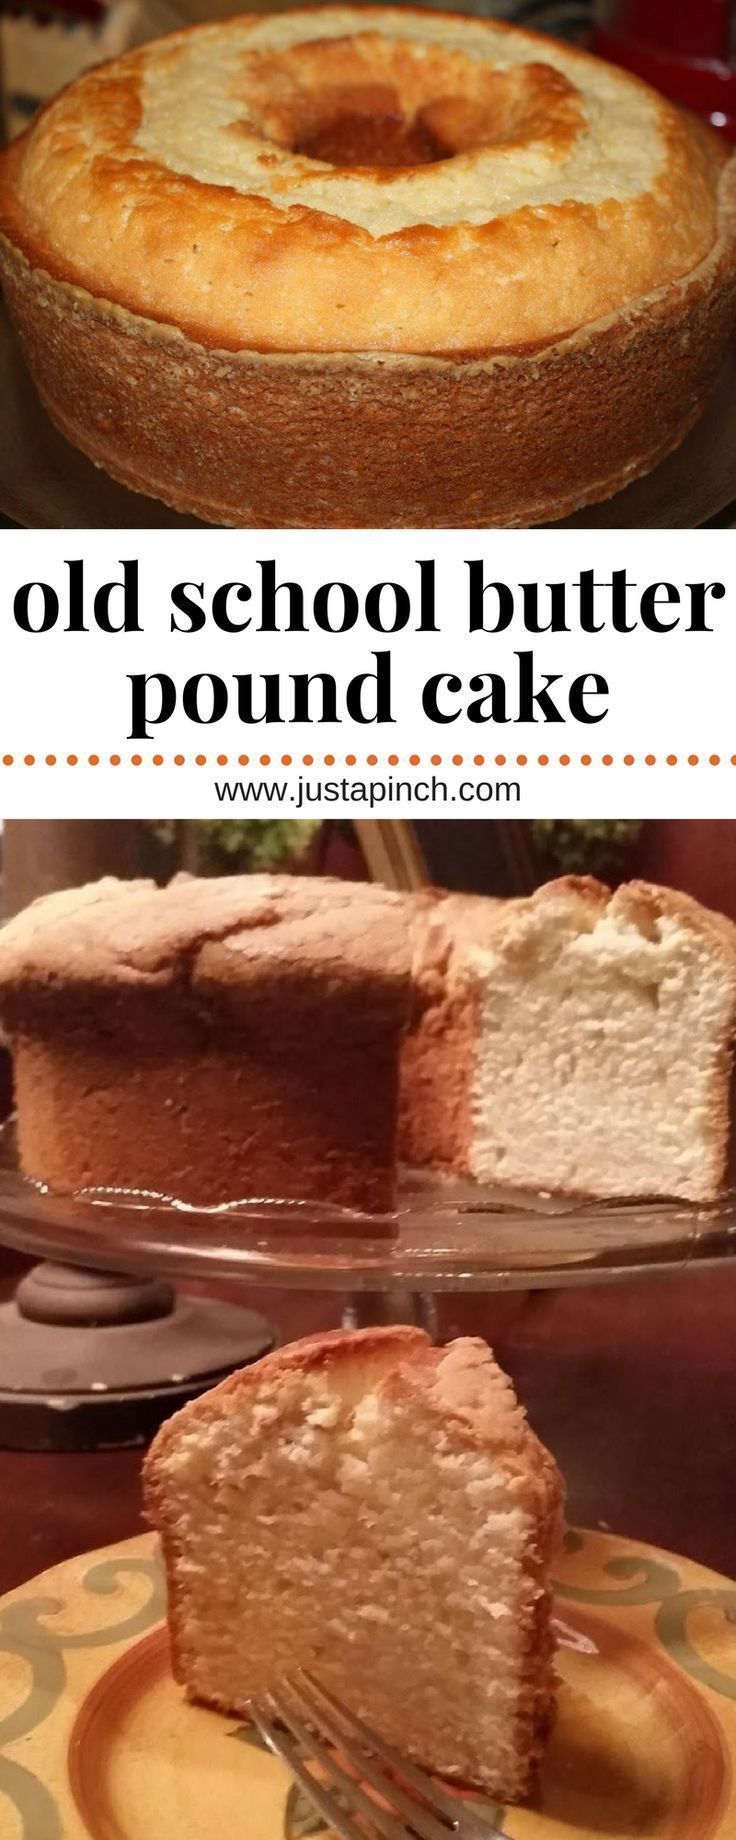 Old School Butter Pound Cake -   19 cake Cheese treats ideas